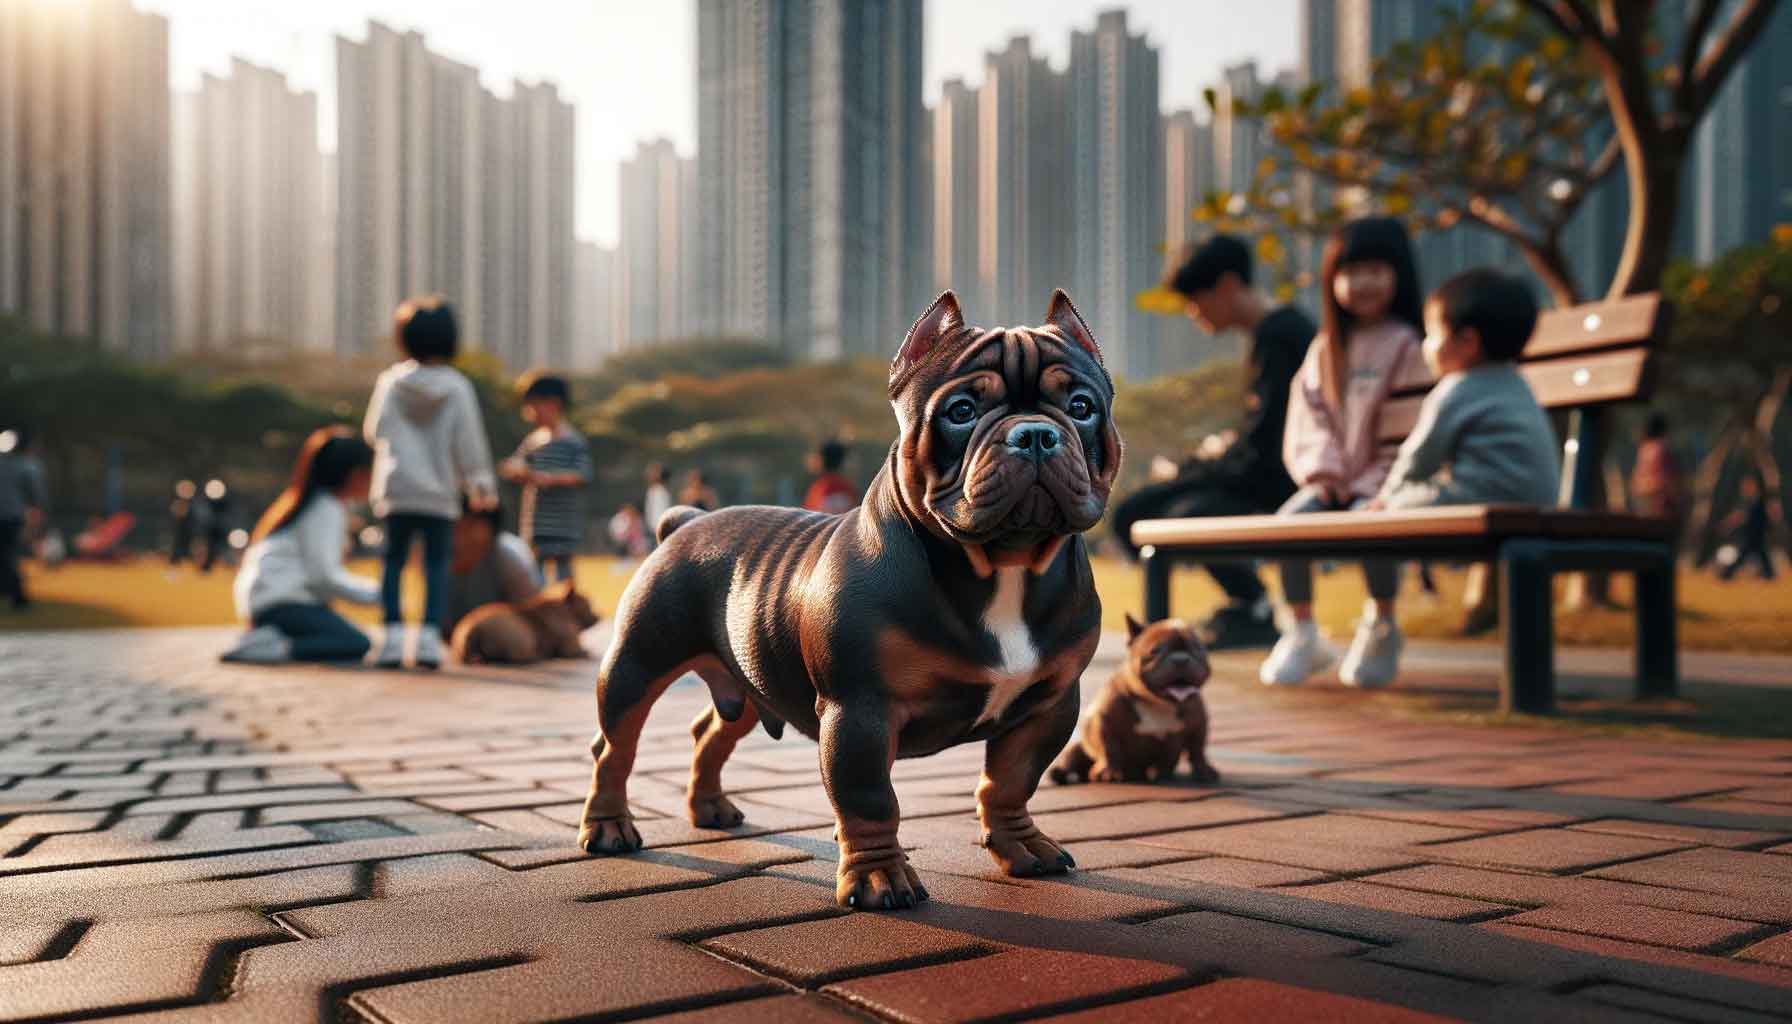 A Nano Micro Bully dog with a glossy brown and black coat standing proudly in an urban park, with children and families in the background, highlighted by the late afternoon sun.